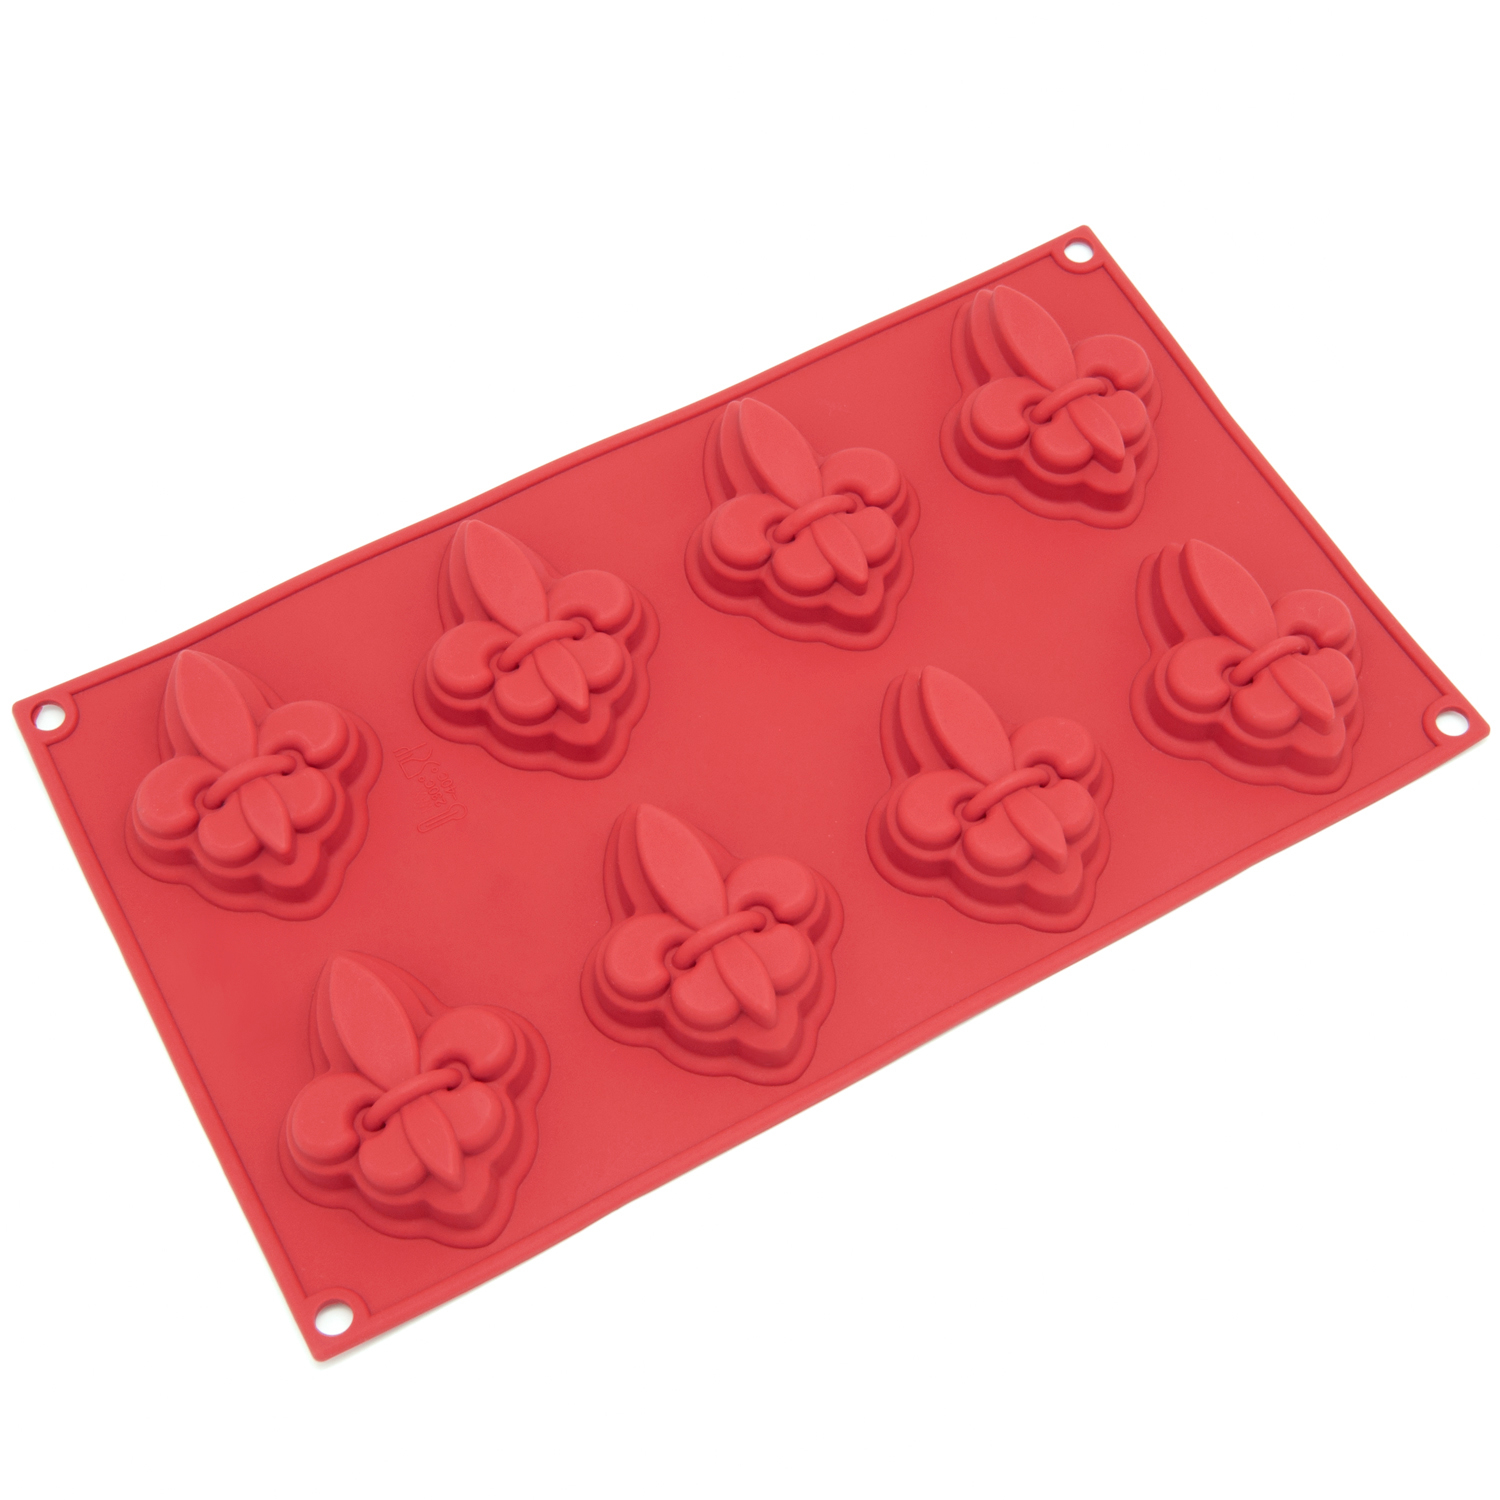 Freshware Silicone Mold, Soap Mold for Pudding, Muffin, Cupcake, Cheesecake and Soap, Fleur-de-lis, 8-Cavity